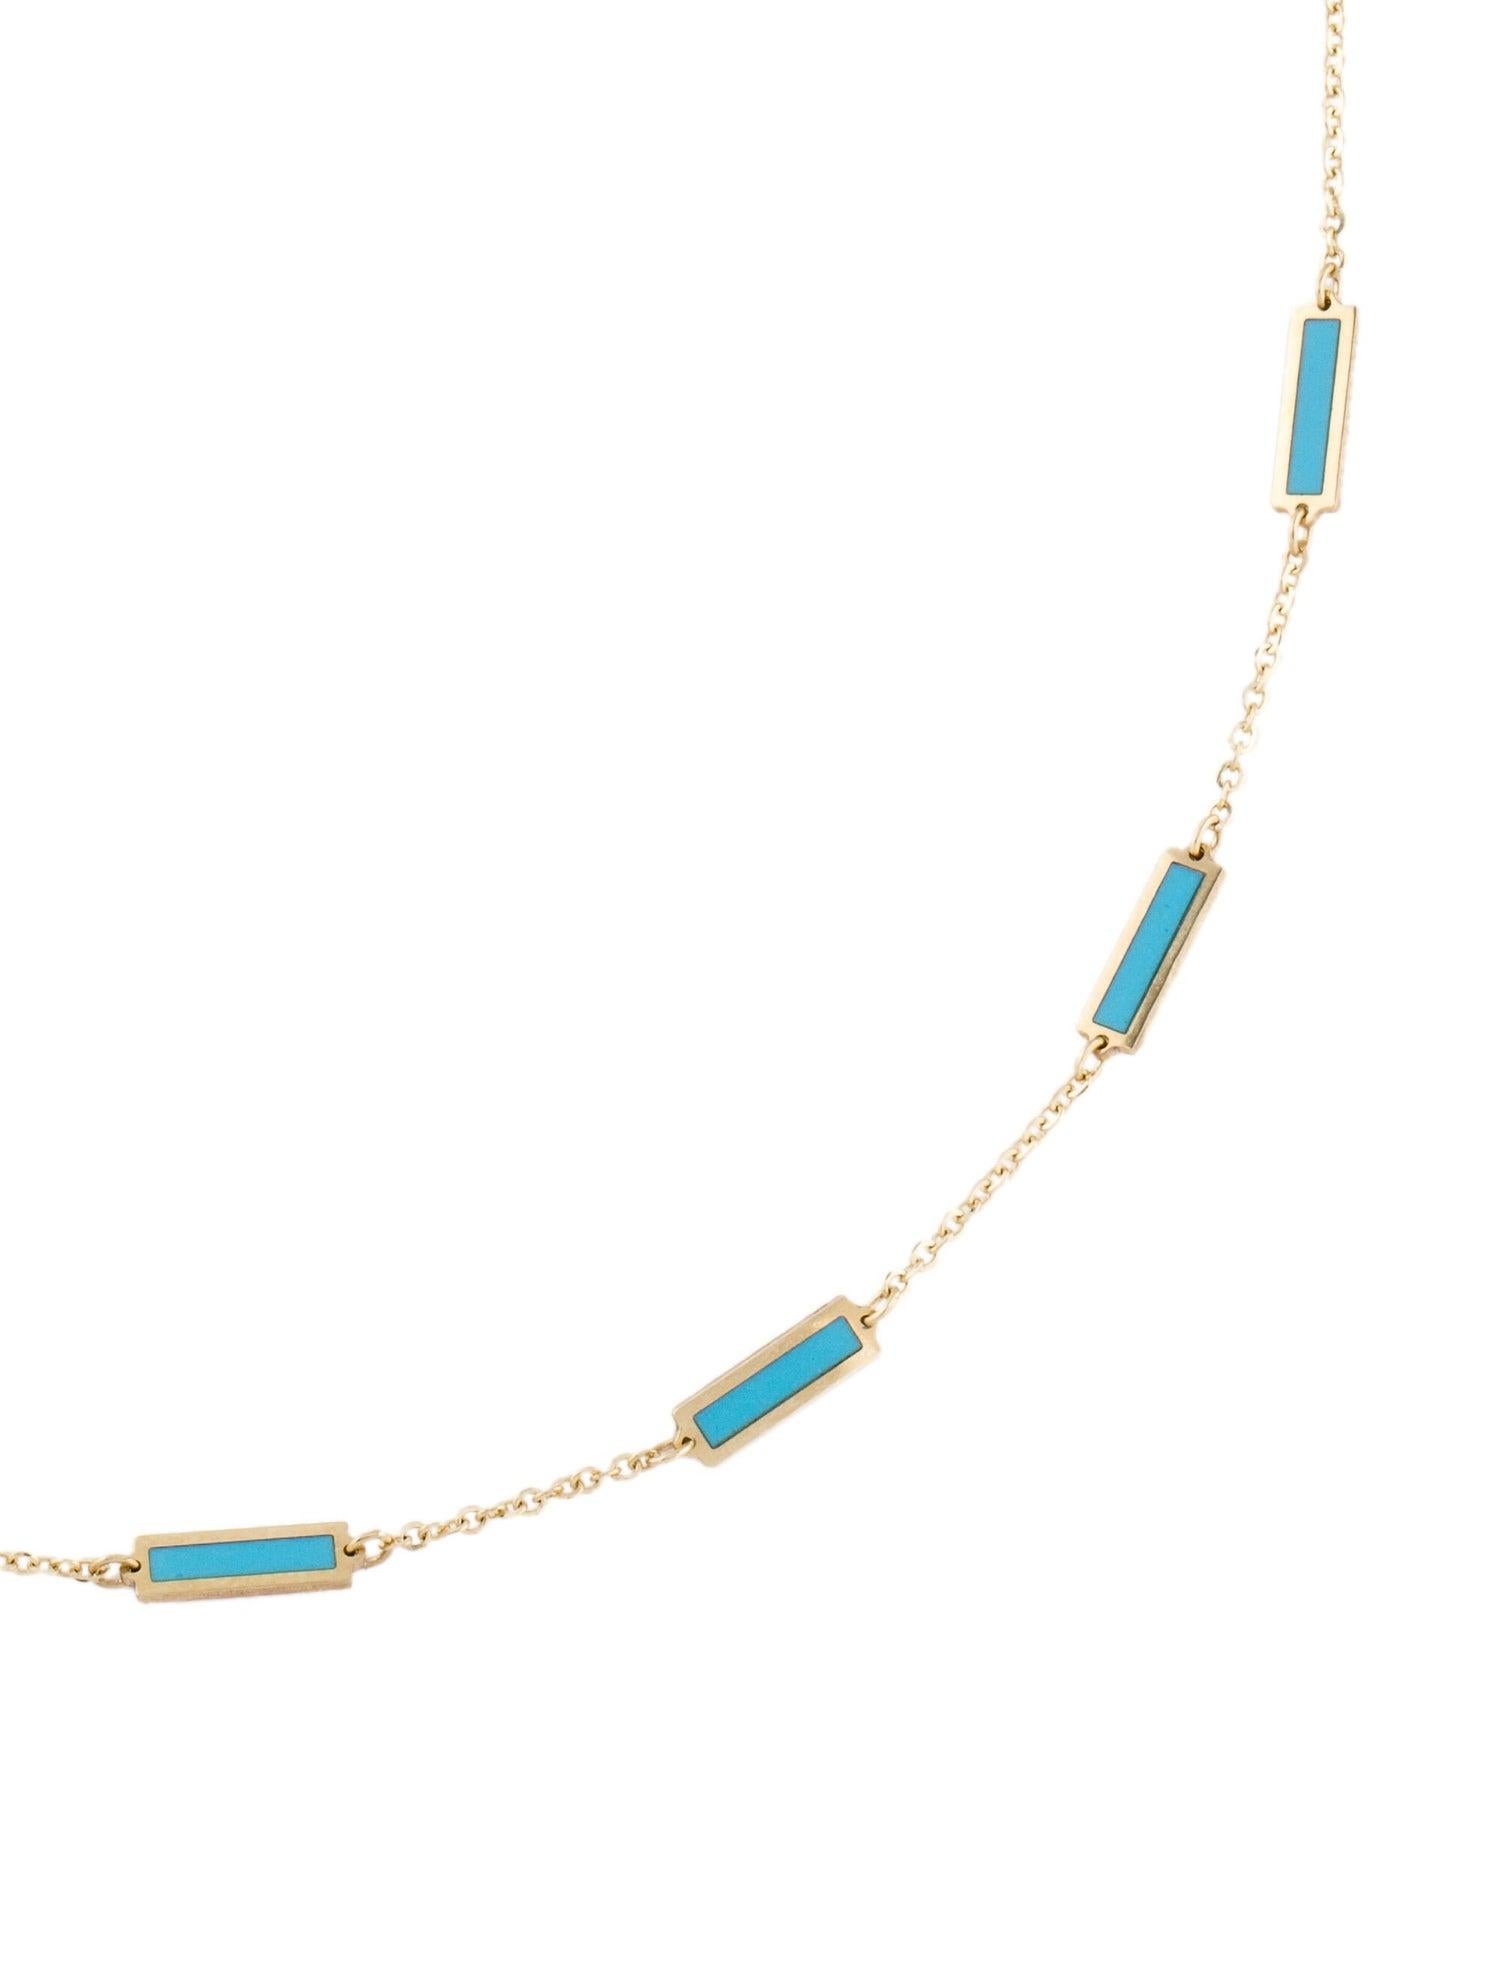 Quality Gemstone Bar Necklace: Focused on design and detail, this beautiful colored gemstone necklace features a station bar design and is crafted of 14k yellow gold. Necklace measurement is 18